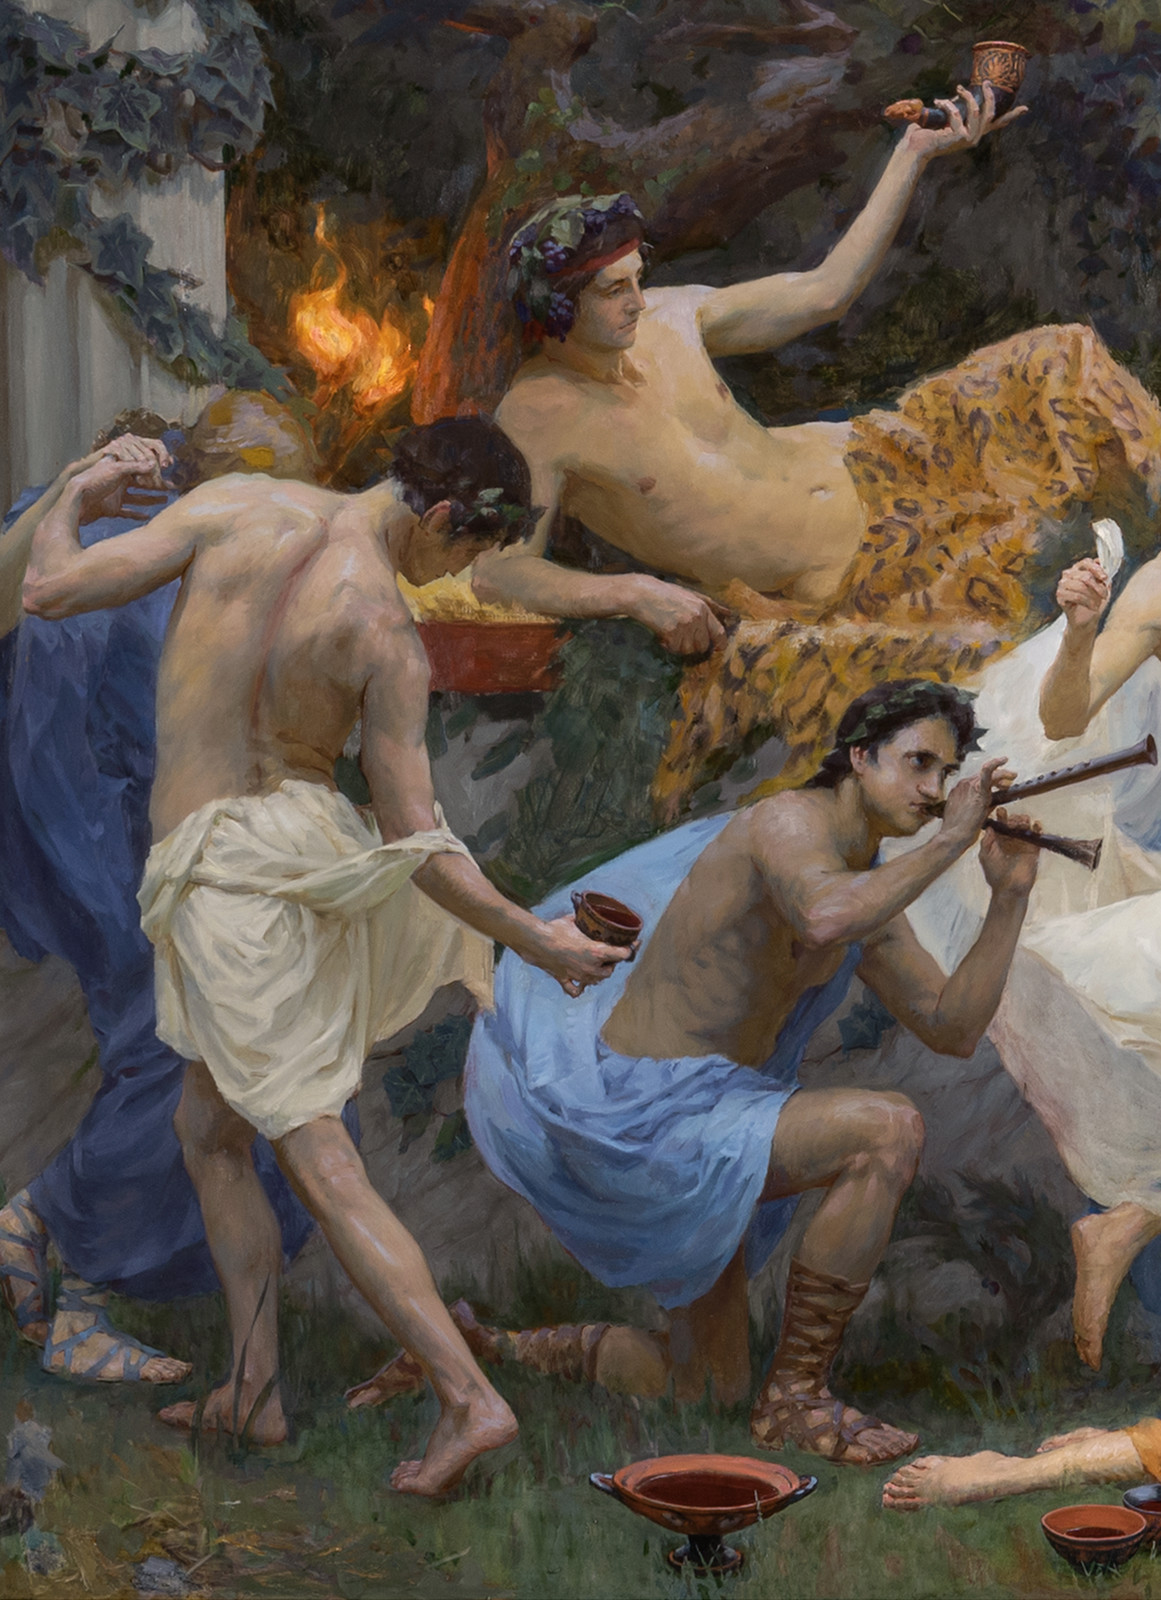 Details: Dionysus and satyrs